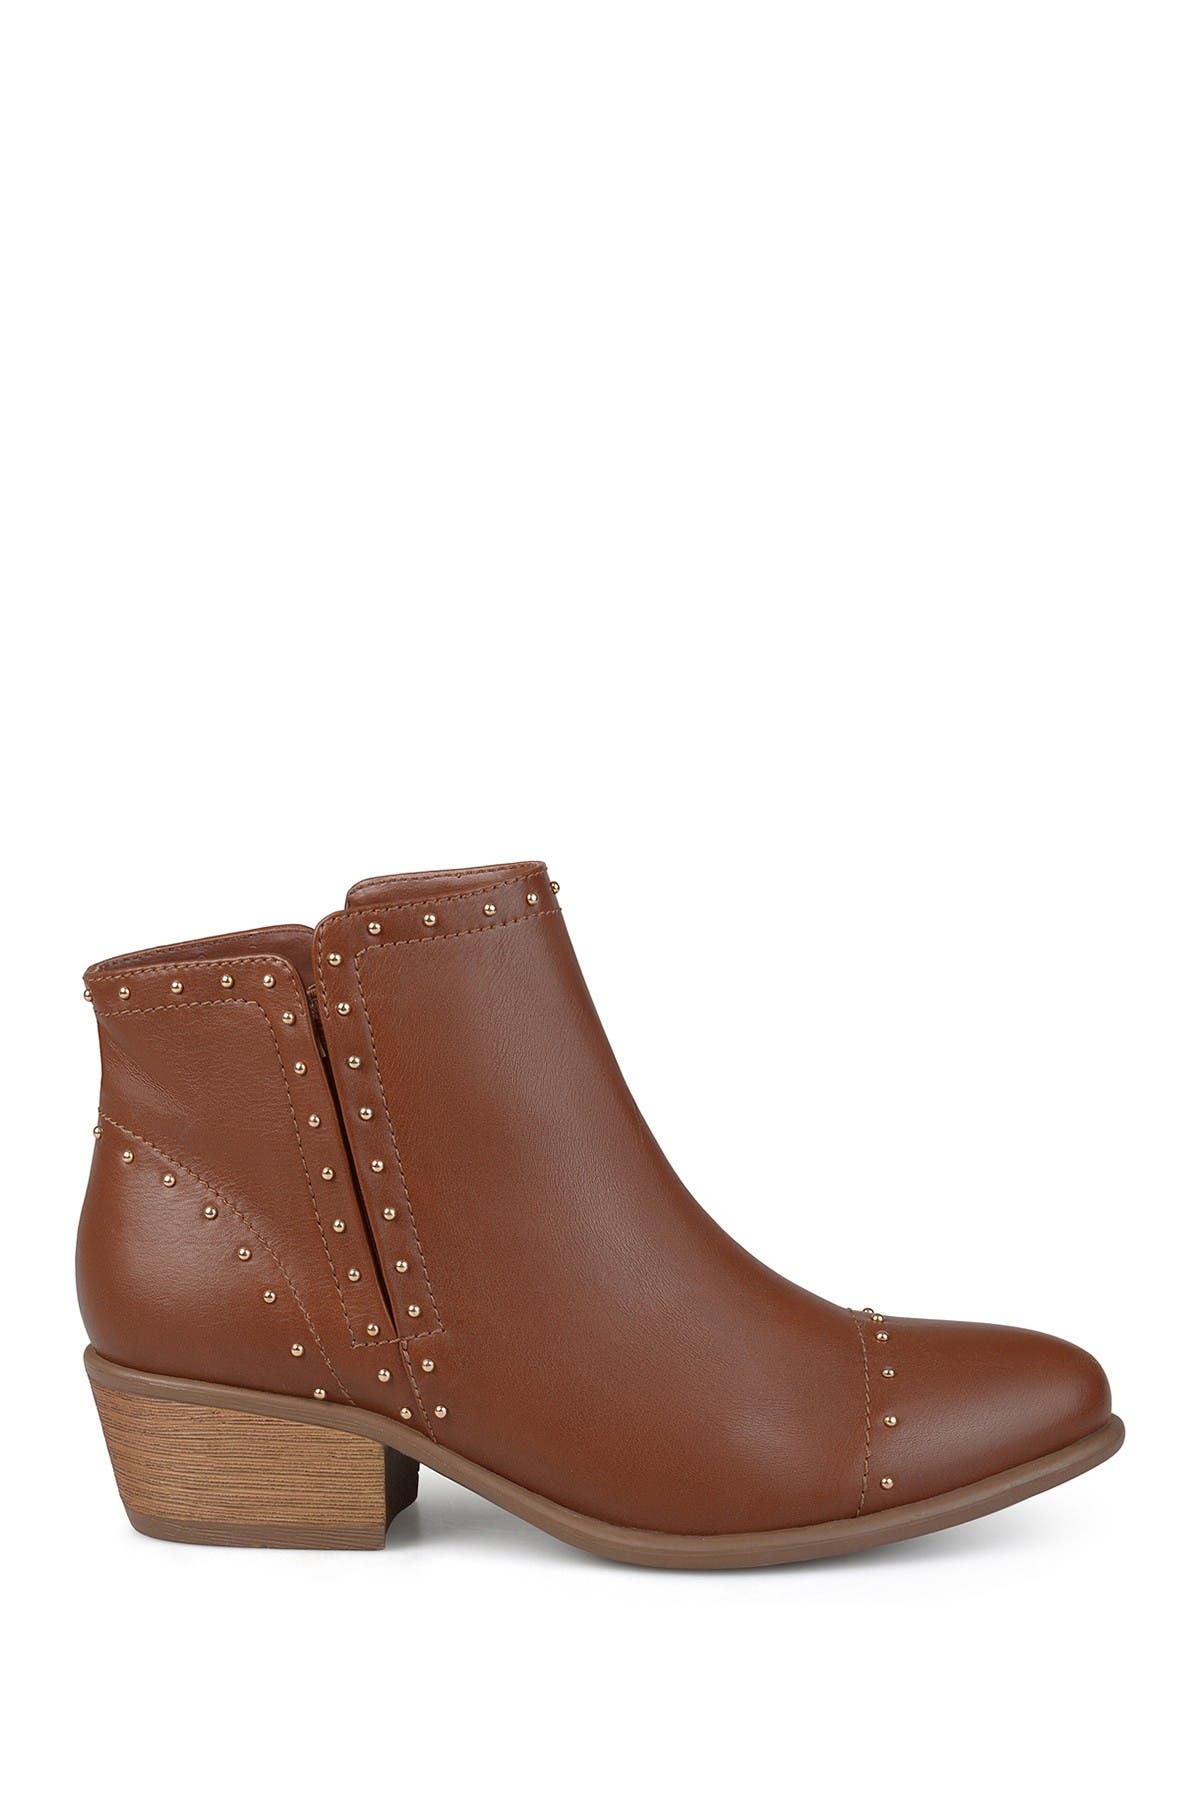 journee collection gypsy bootie